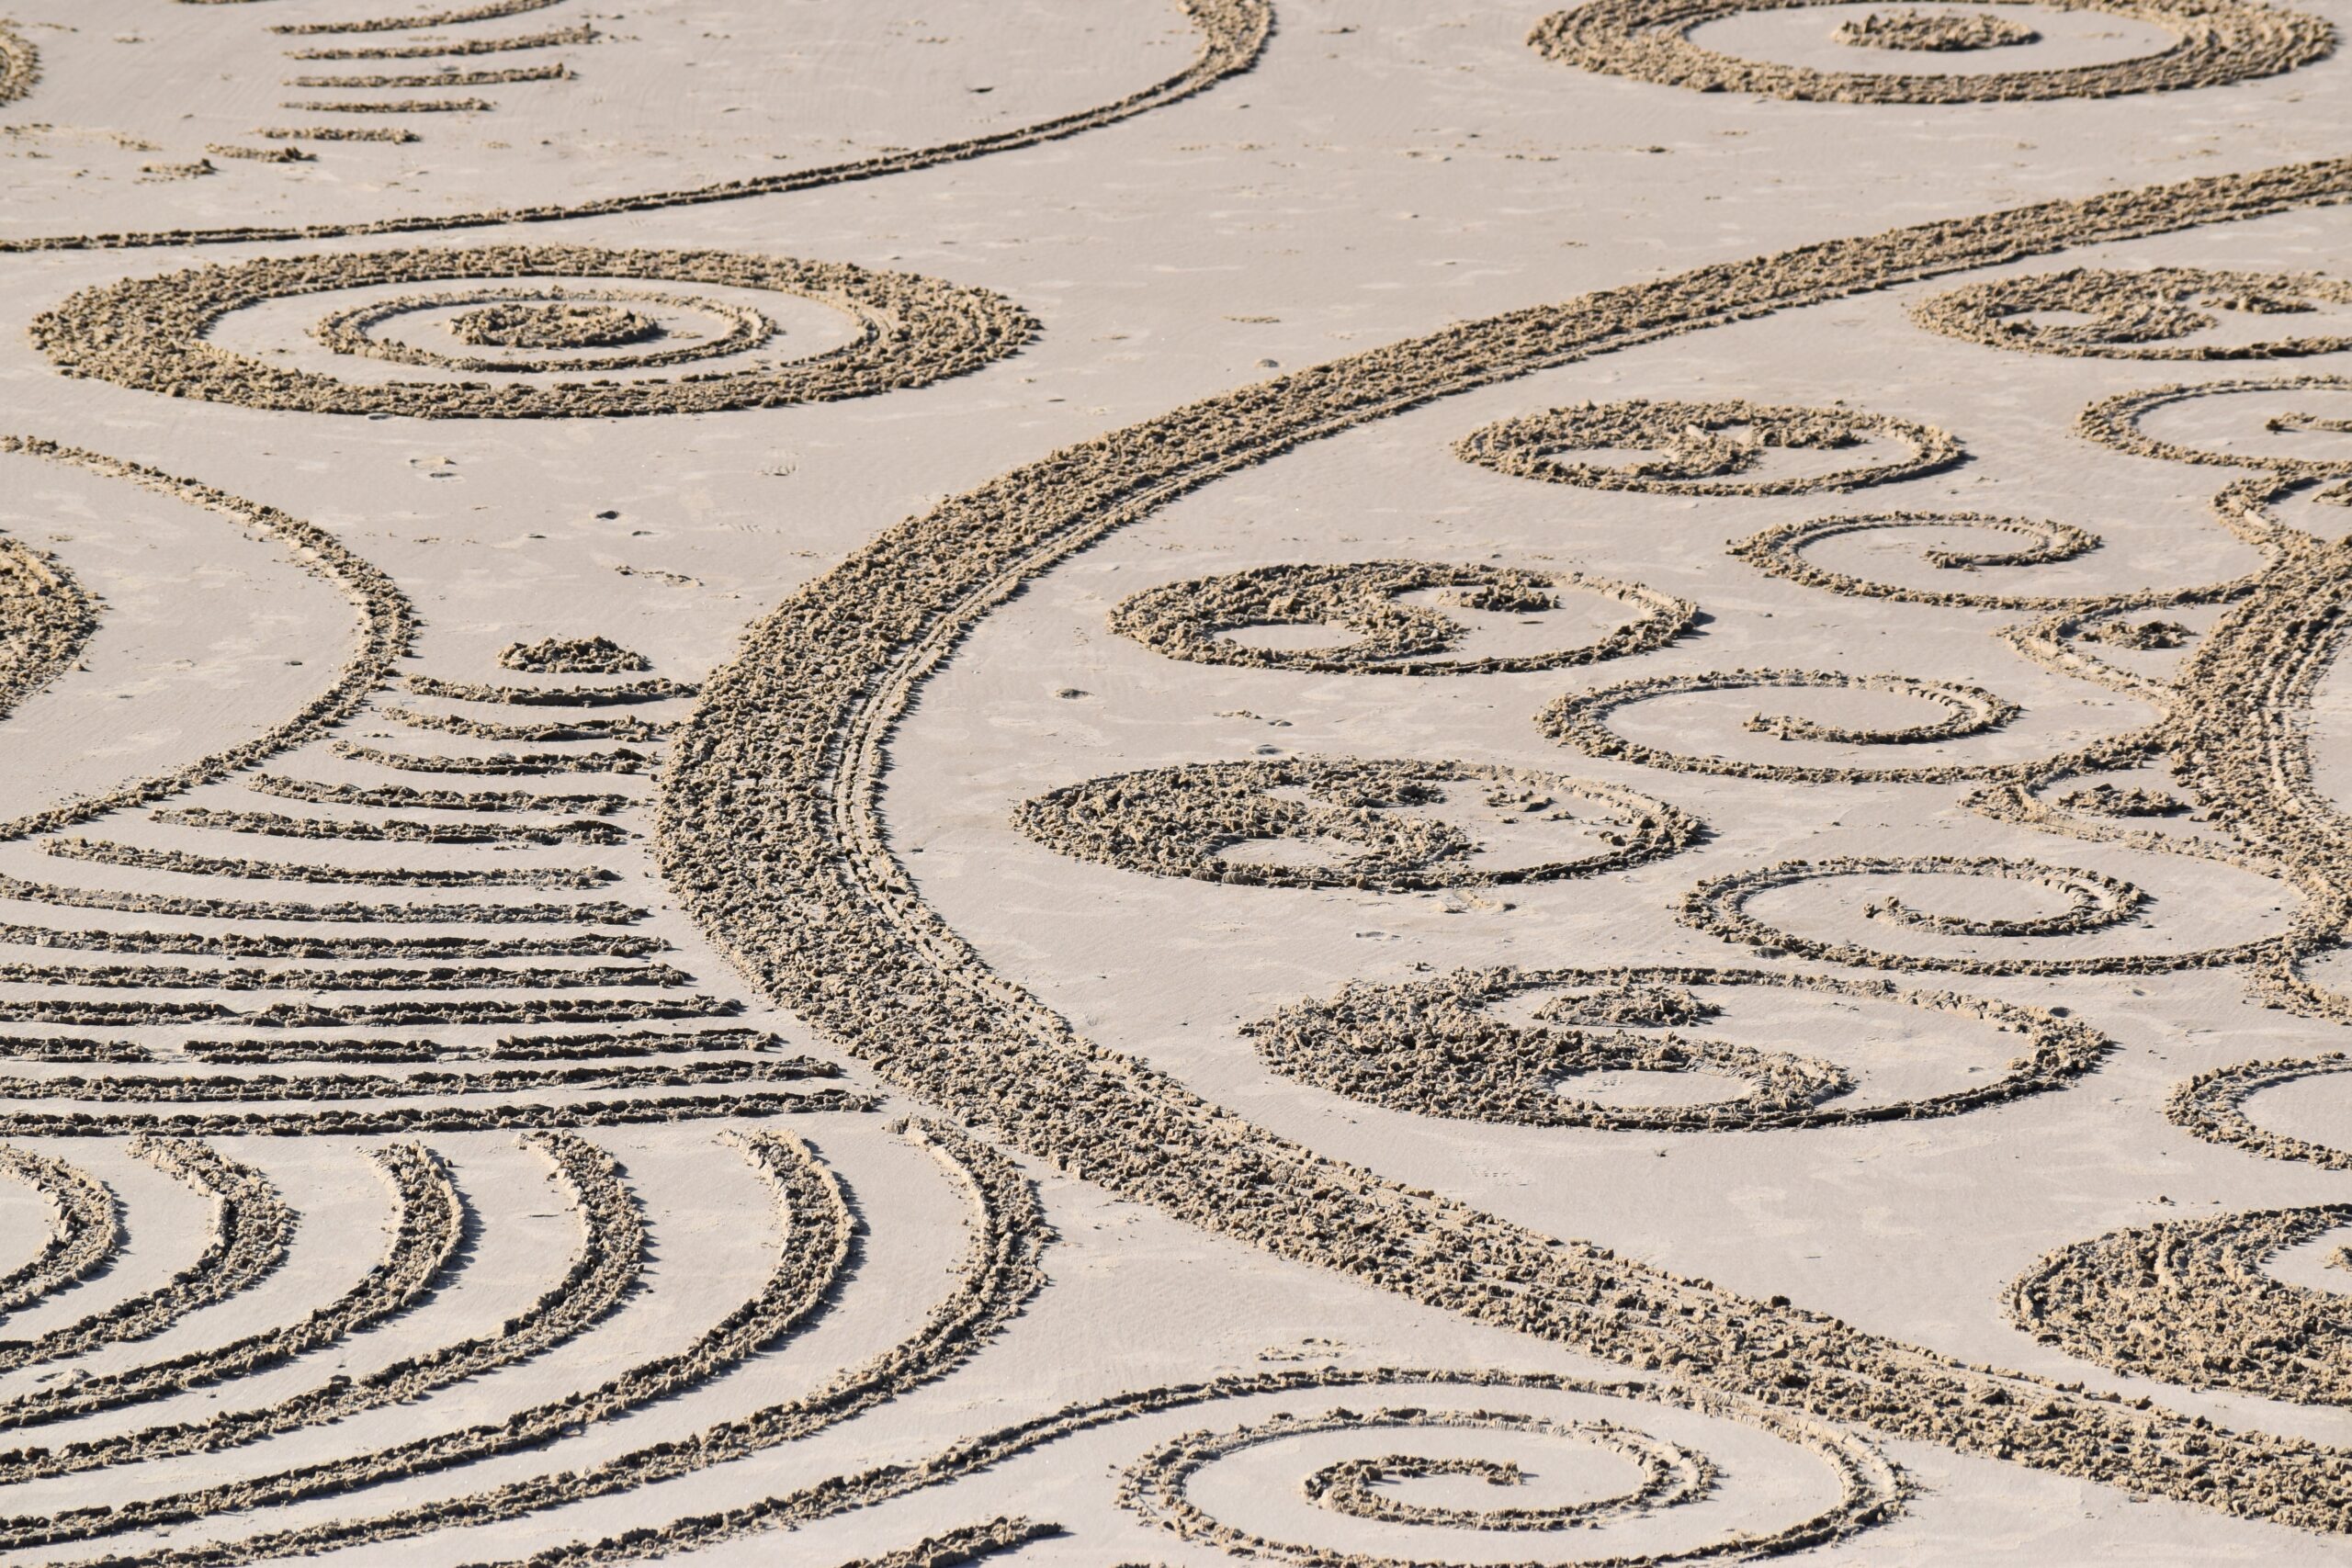 Photo by Jase Ess on Unsplash. Patterns drawn in the sand on a beach.